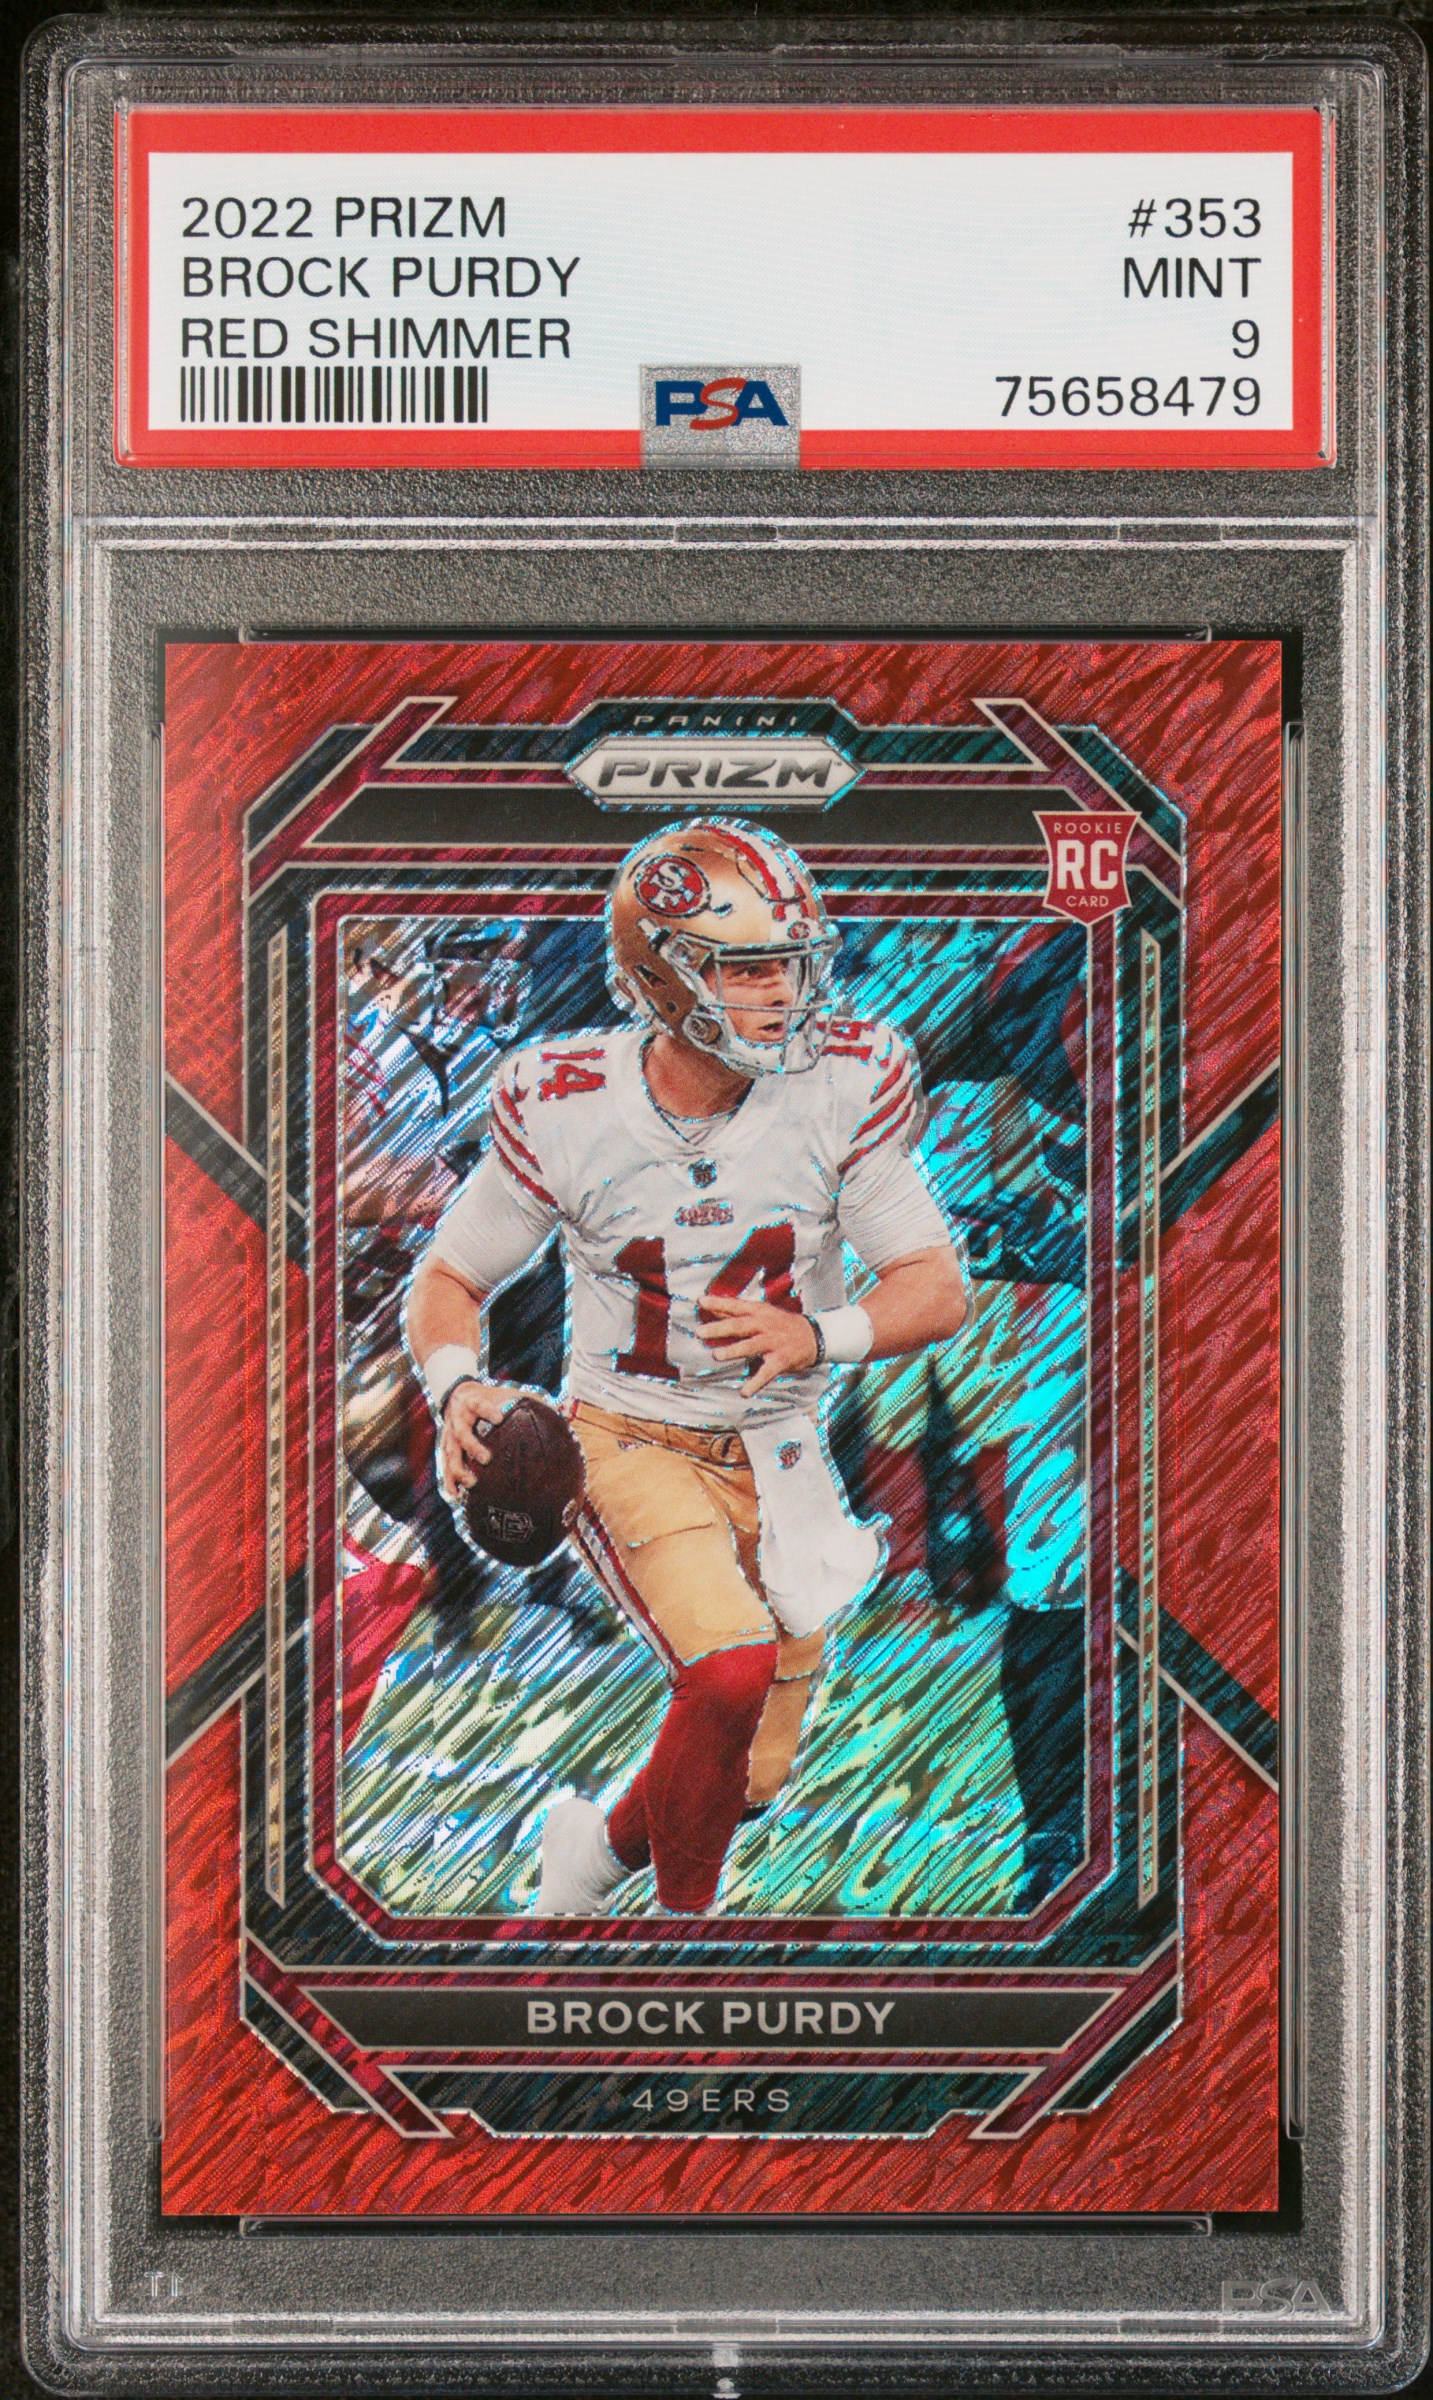 2022 Panini Prizm Red Shimmer #353 Brock Purdy Rookie Card (#08/35) – PSA MINT 9